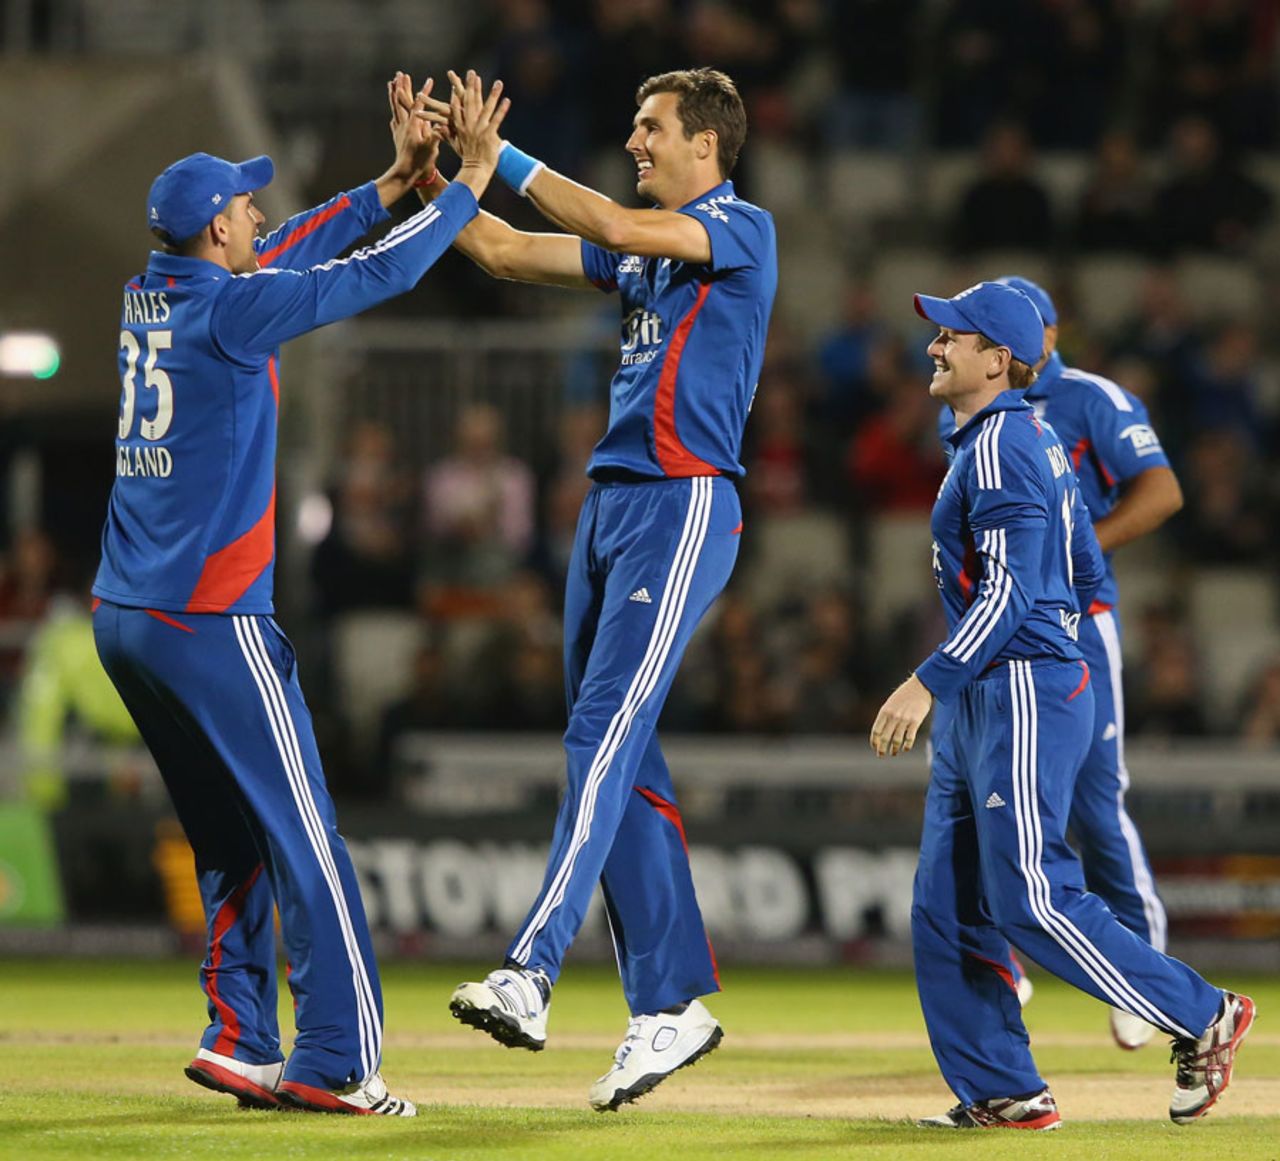 Steven Finn struck with two quick wickets, England v South Africa, 2nd T20, Old Trafford, September, 10, 2012